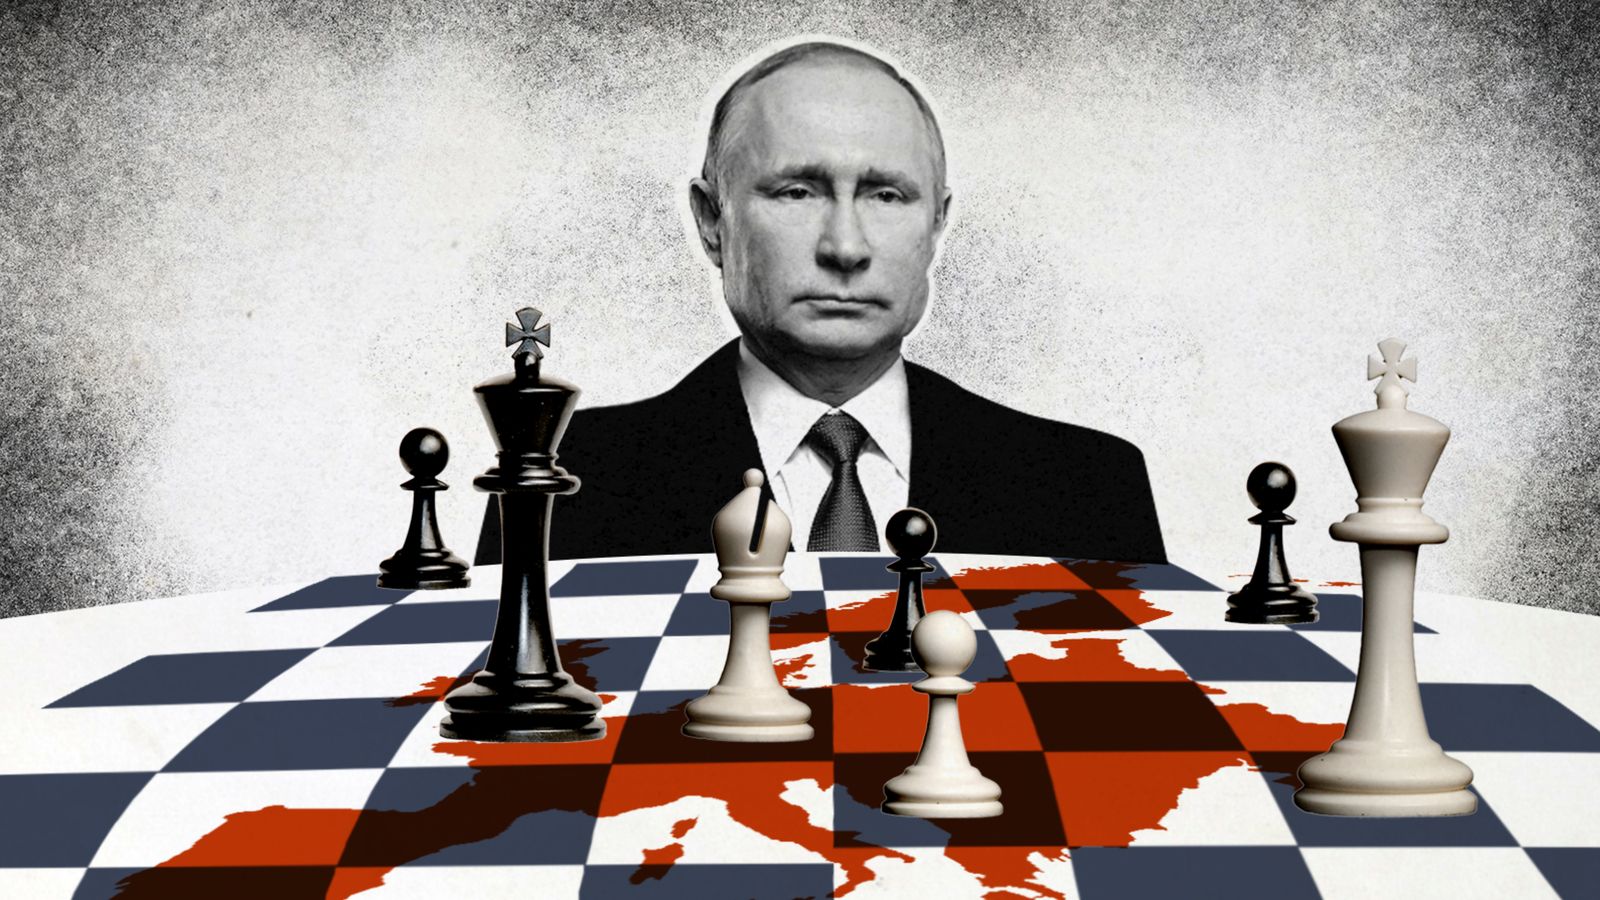 Russian chess players tell Putin to 'stop the war